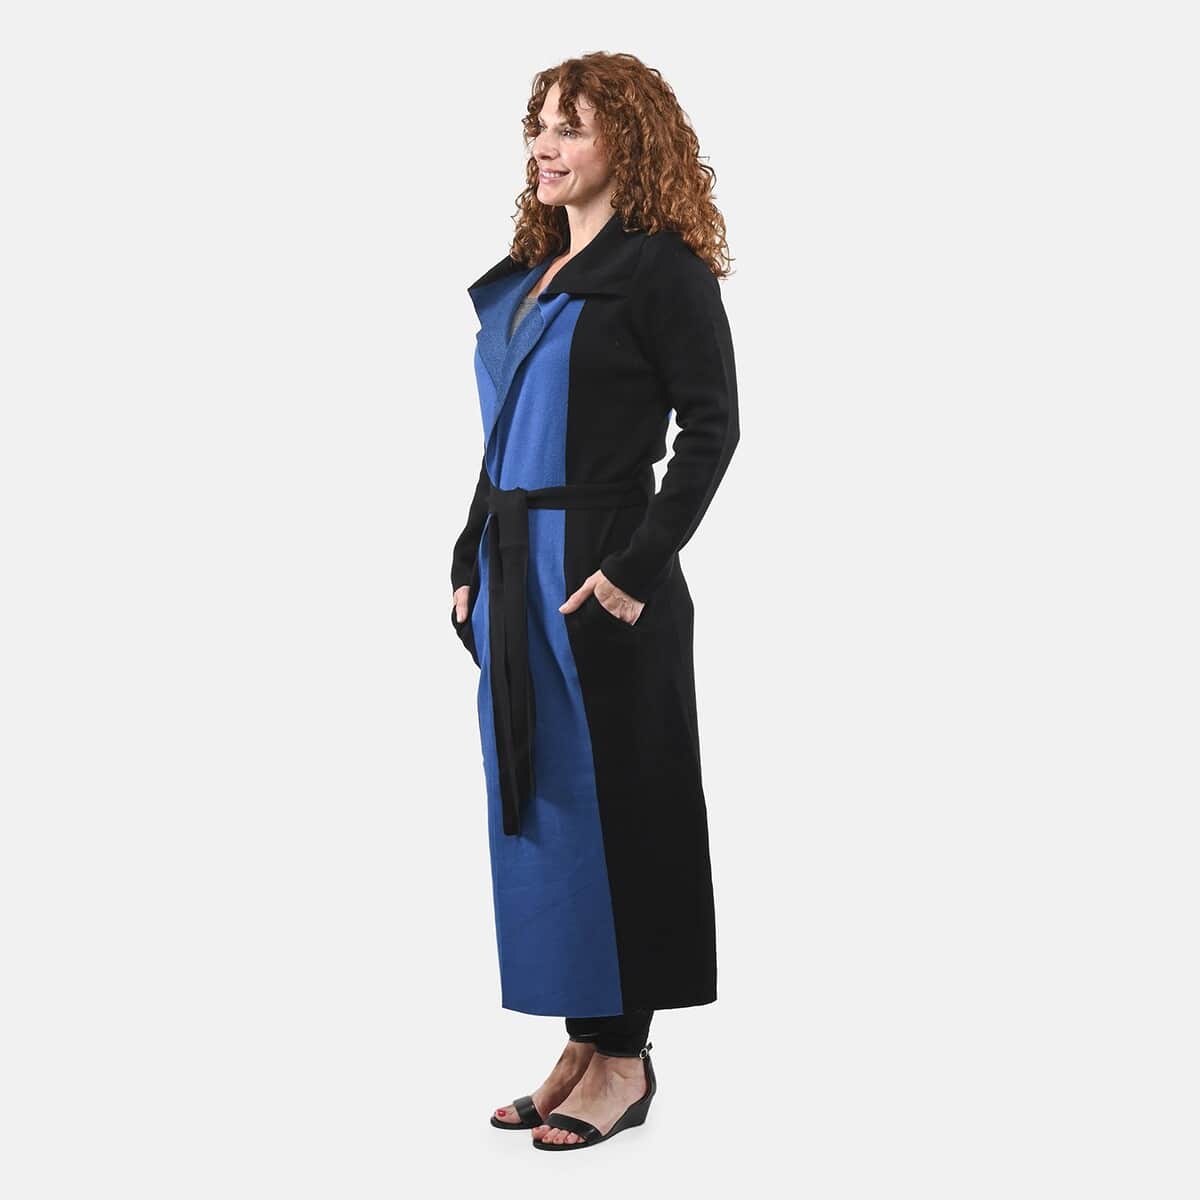 Badgley Mischka Blue and Black Colorblock Trench Sweater - S image number 3